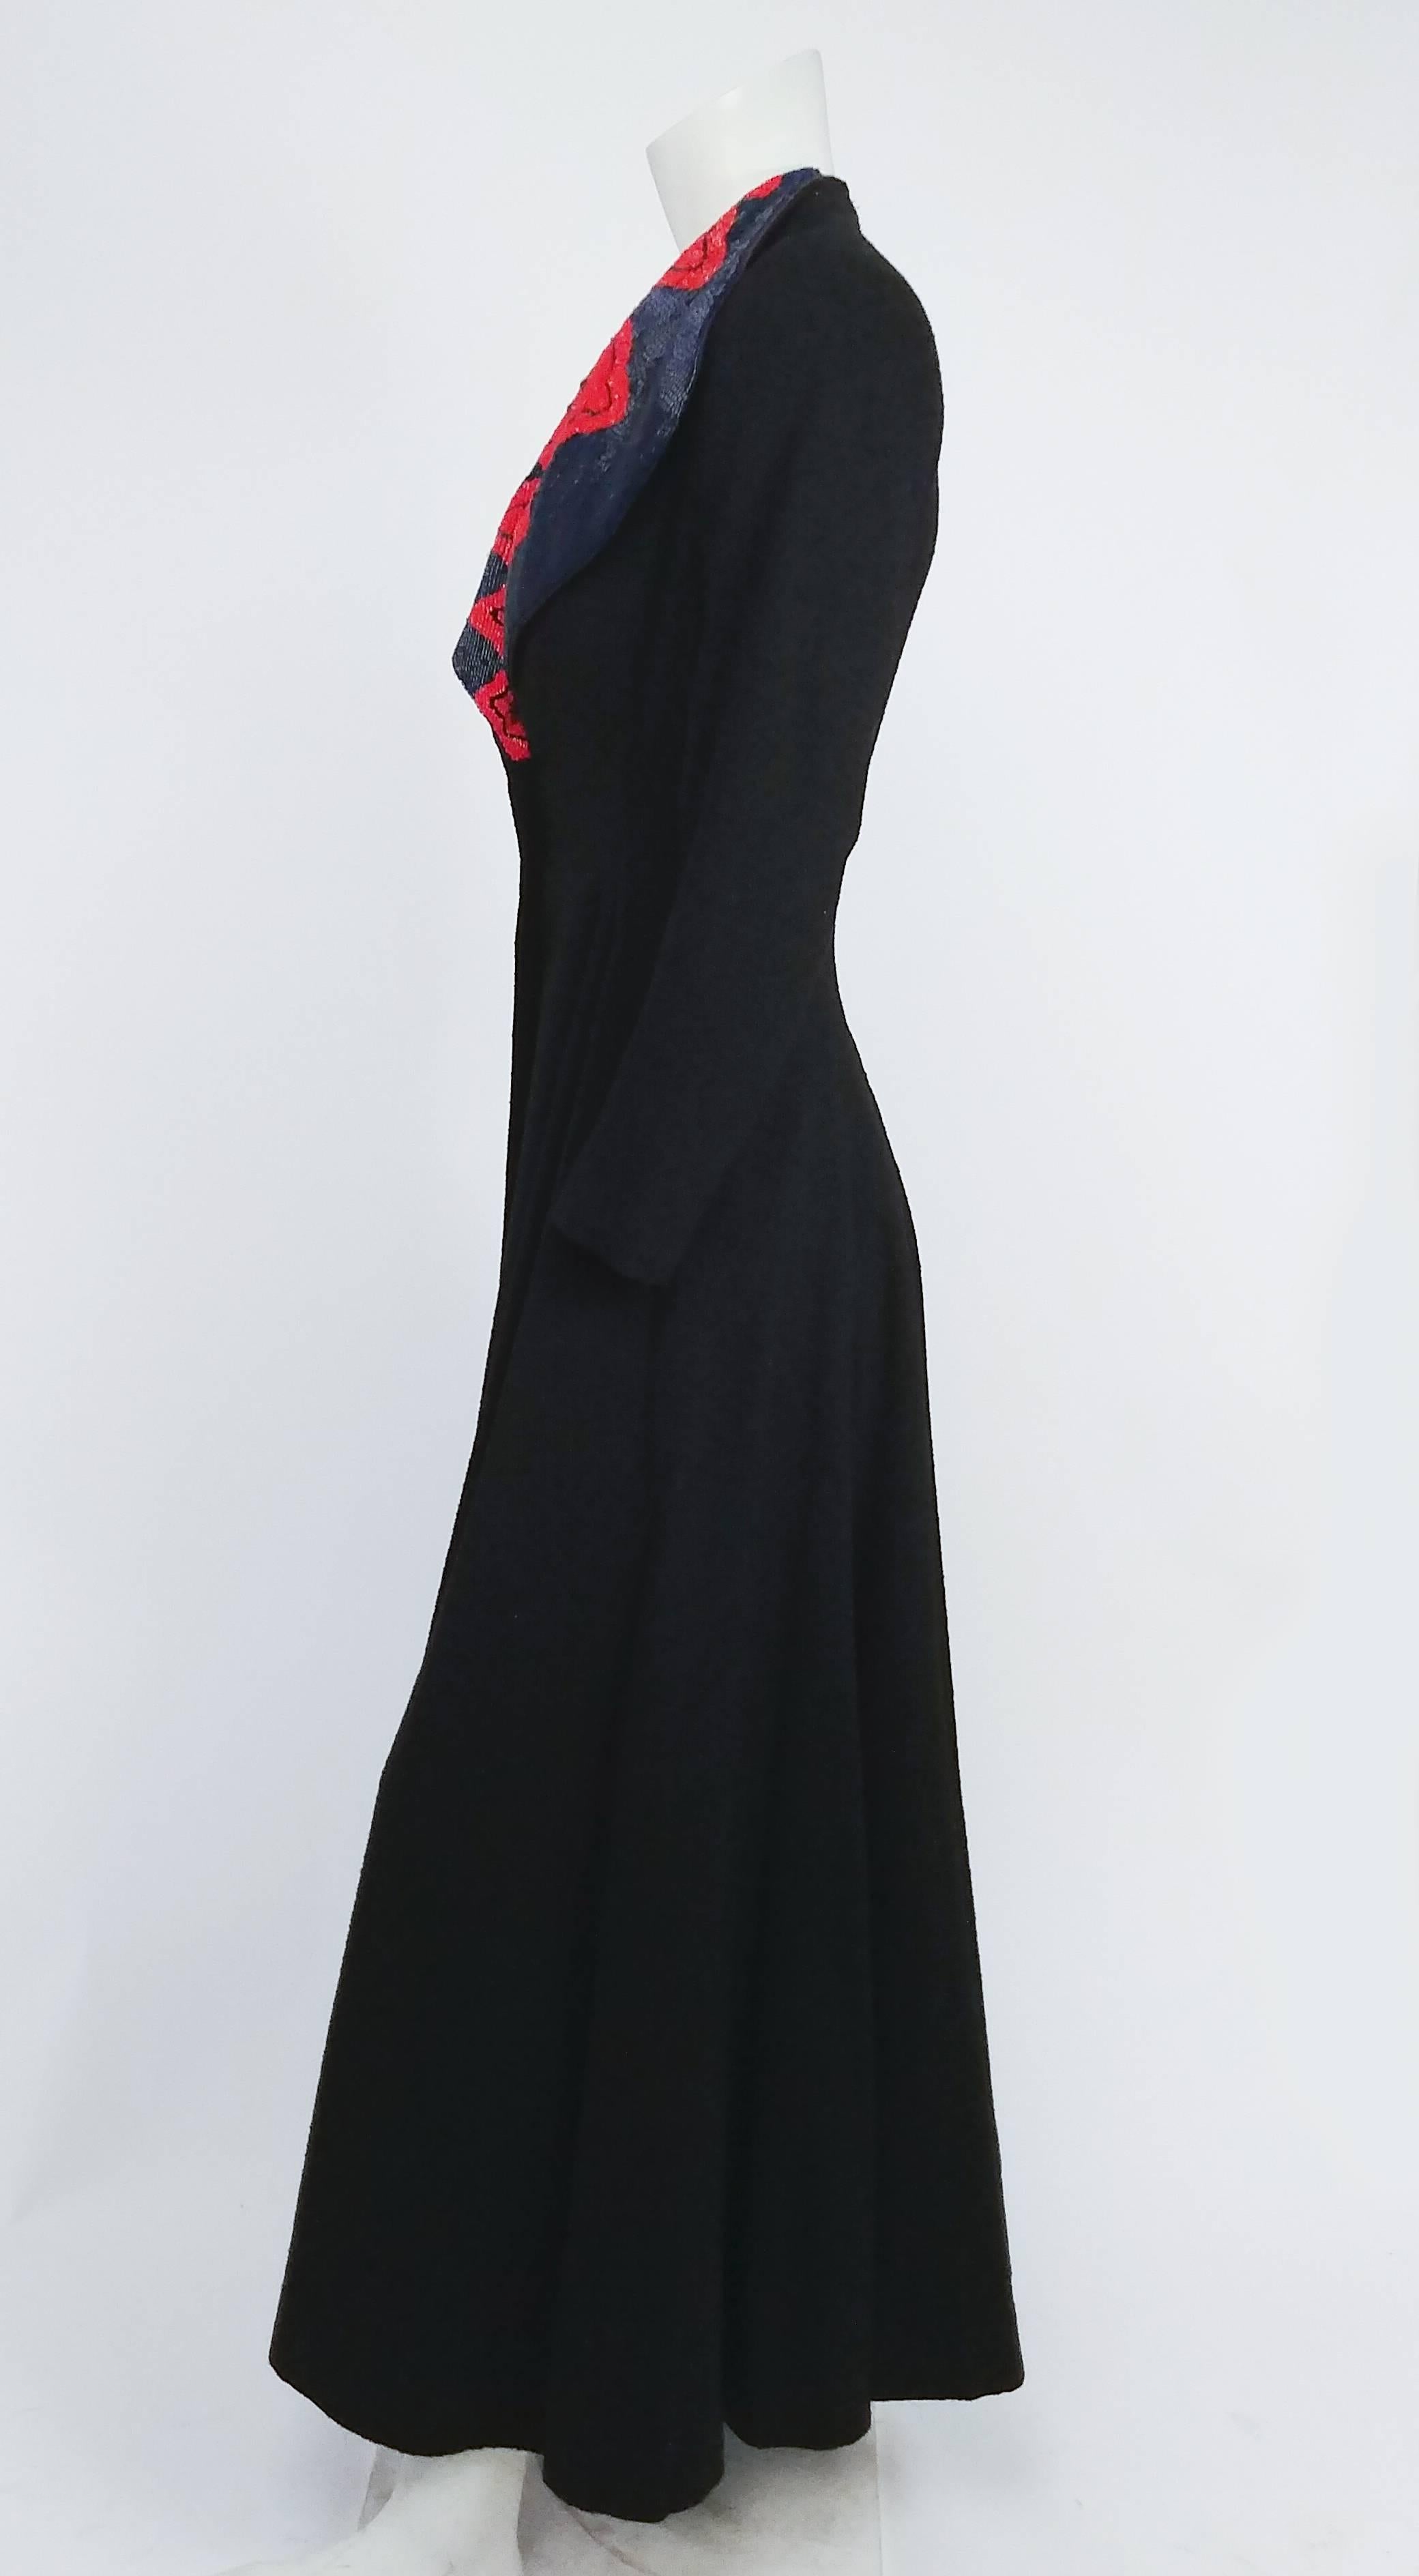 1940s Black Wool Coat w/ Red & Blue Beaded Collar. Gorgeous full length 1940s coat with red & blue large beaded collar. 3 buttons down front. Fitted waist, skirt flares out. Textured black wool.